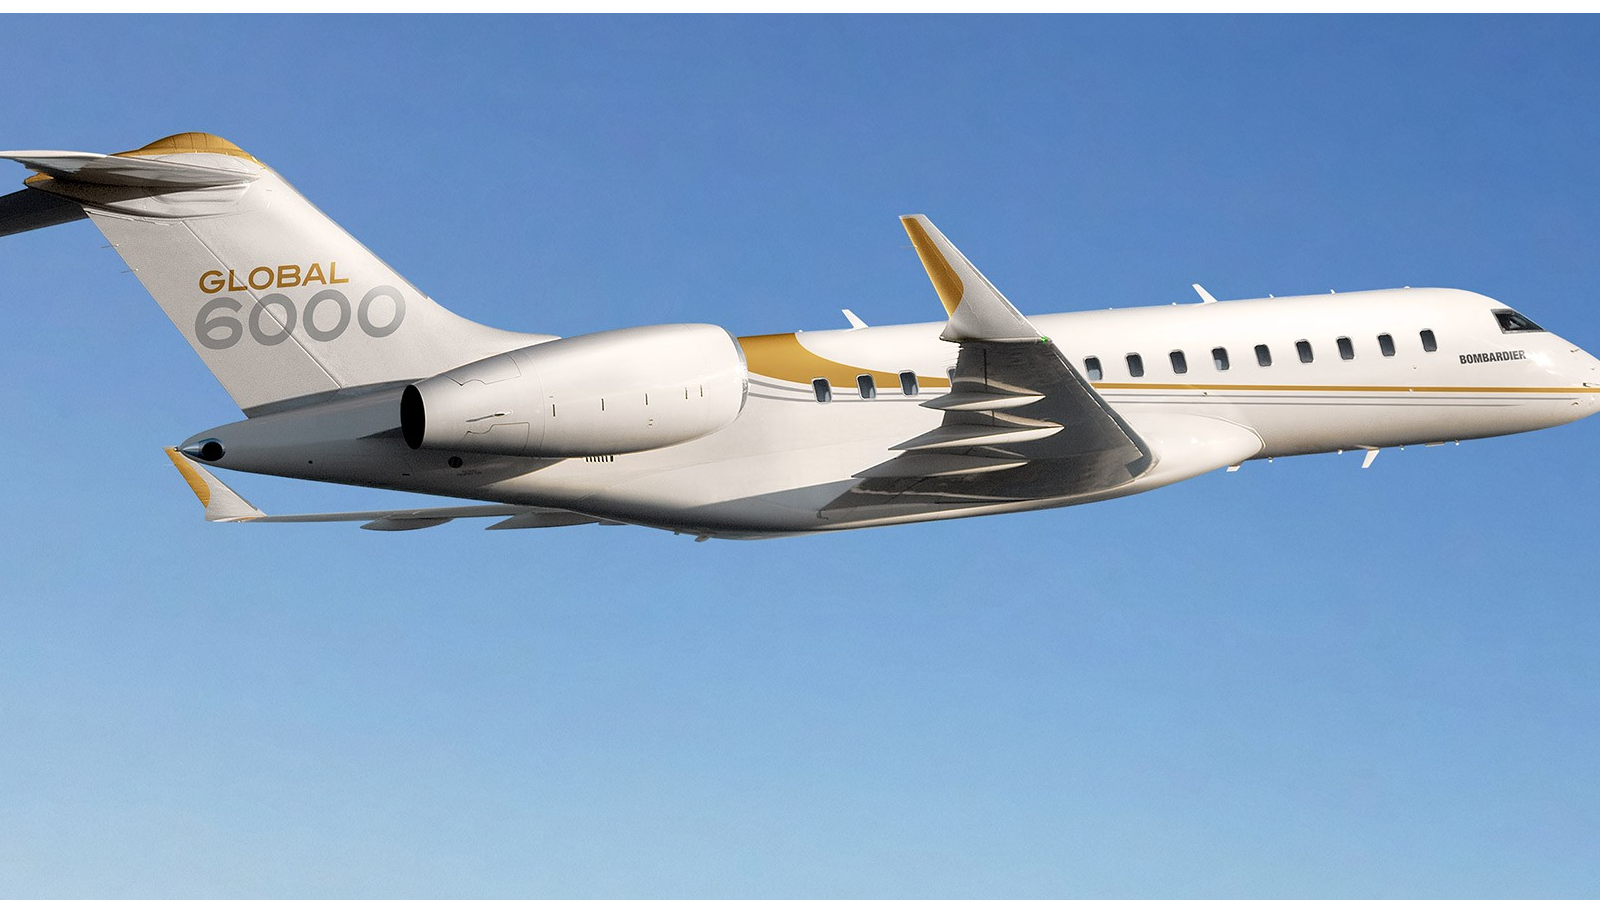 https://adgully.me/post/1948/dc-aviation-al-futtaim-adds-two-new-aircraft-to-its-managed-fleet